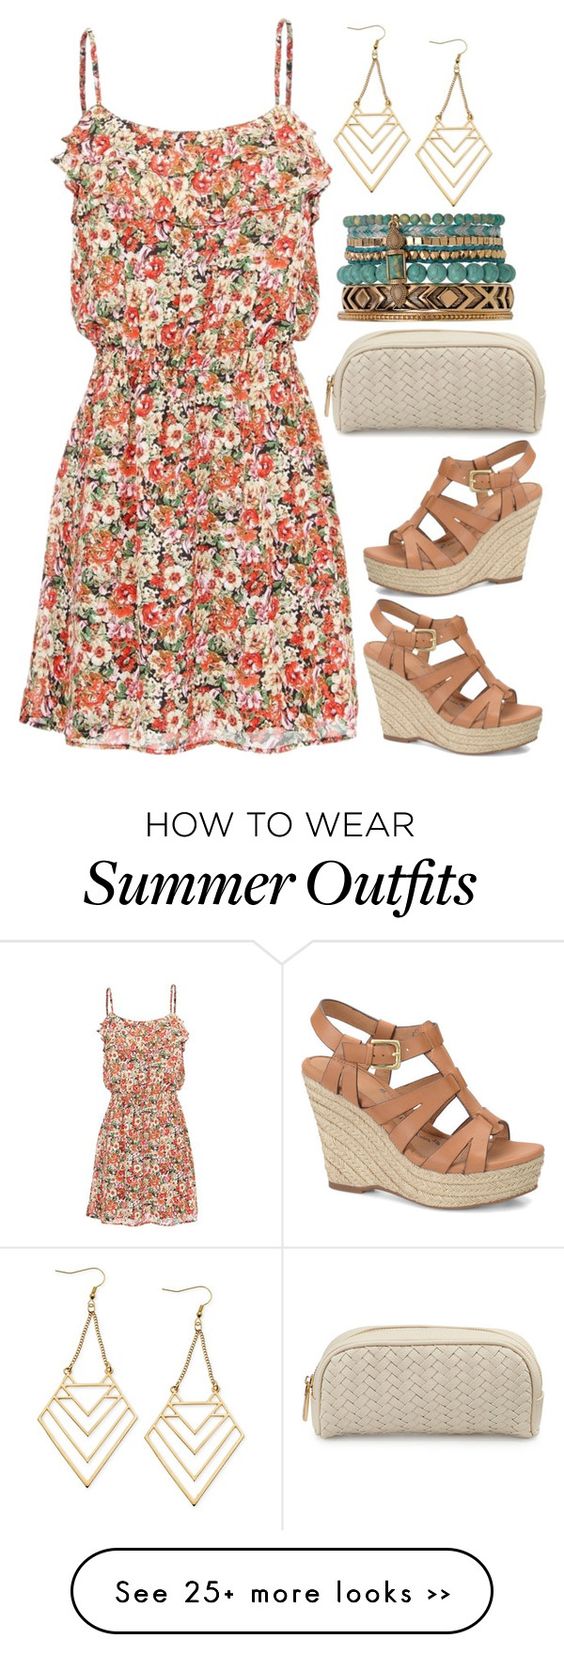 Cool Summer Outfits For Stylish Women